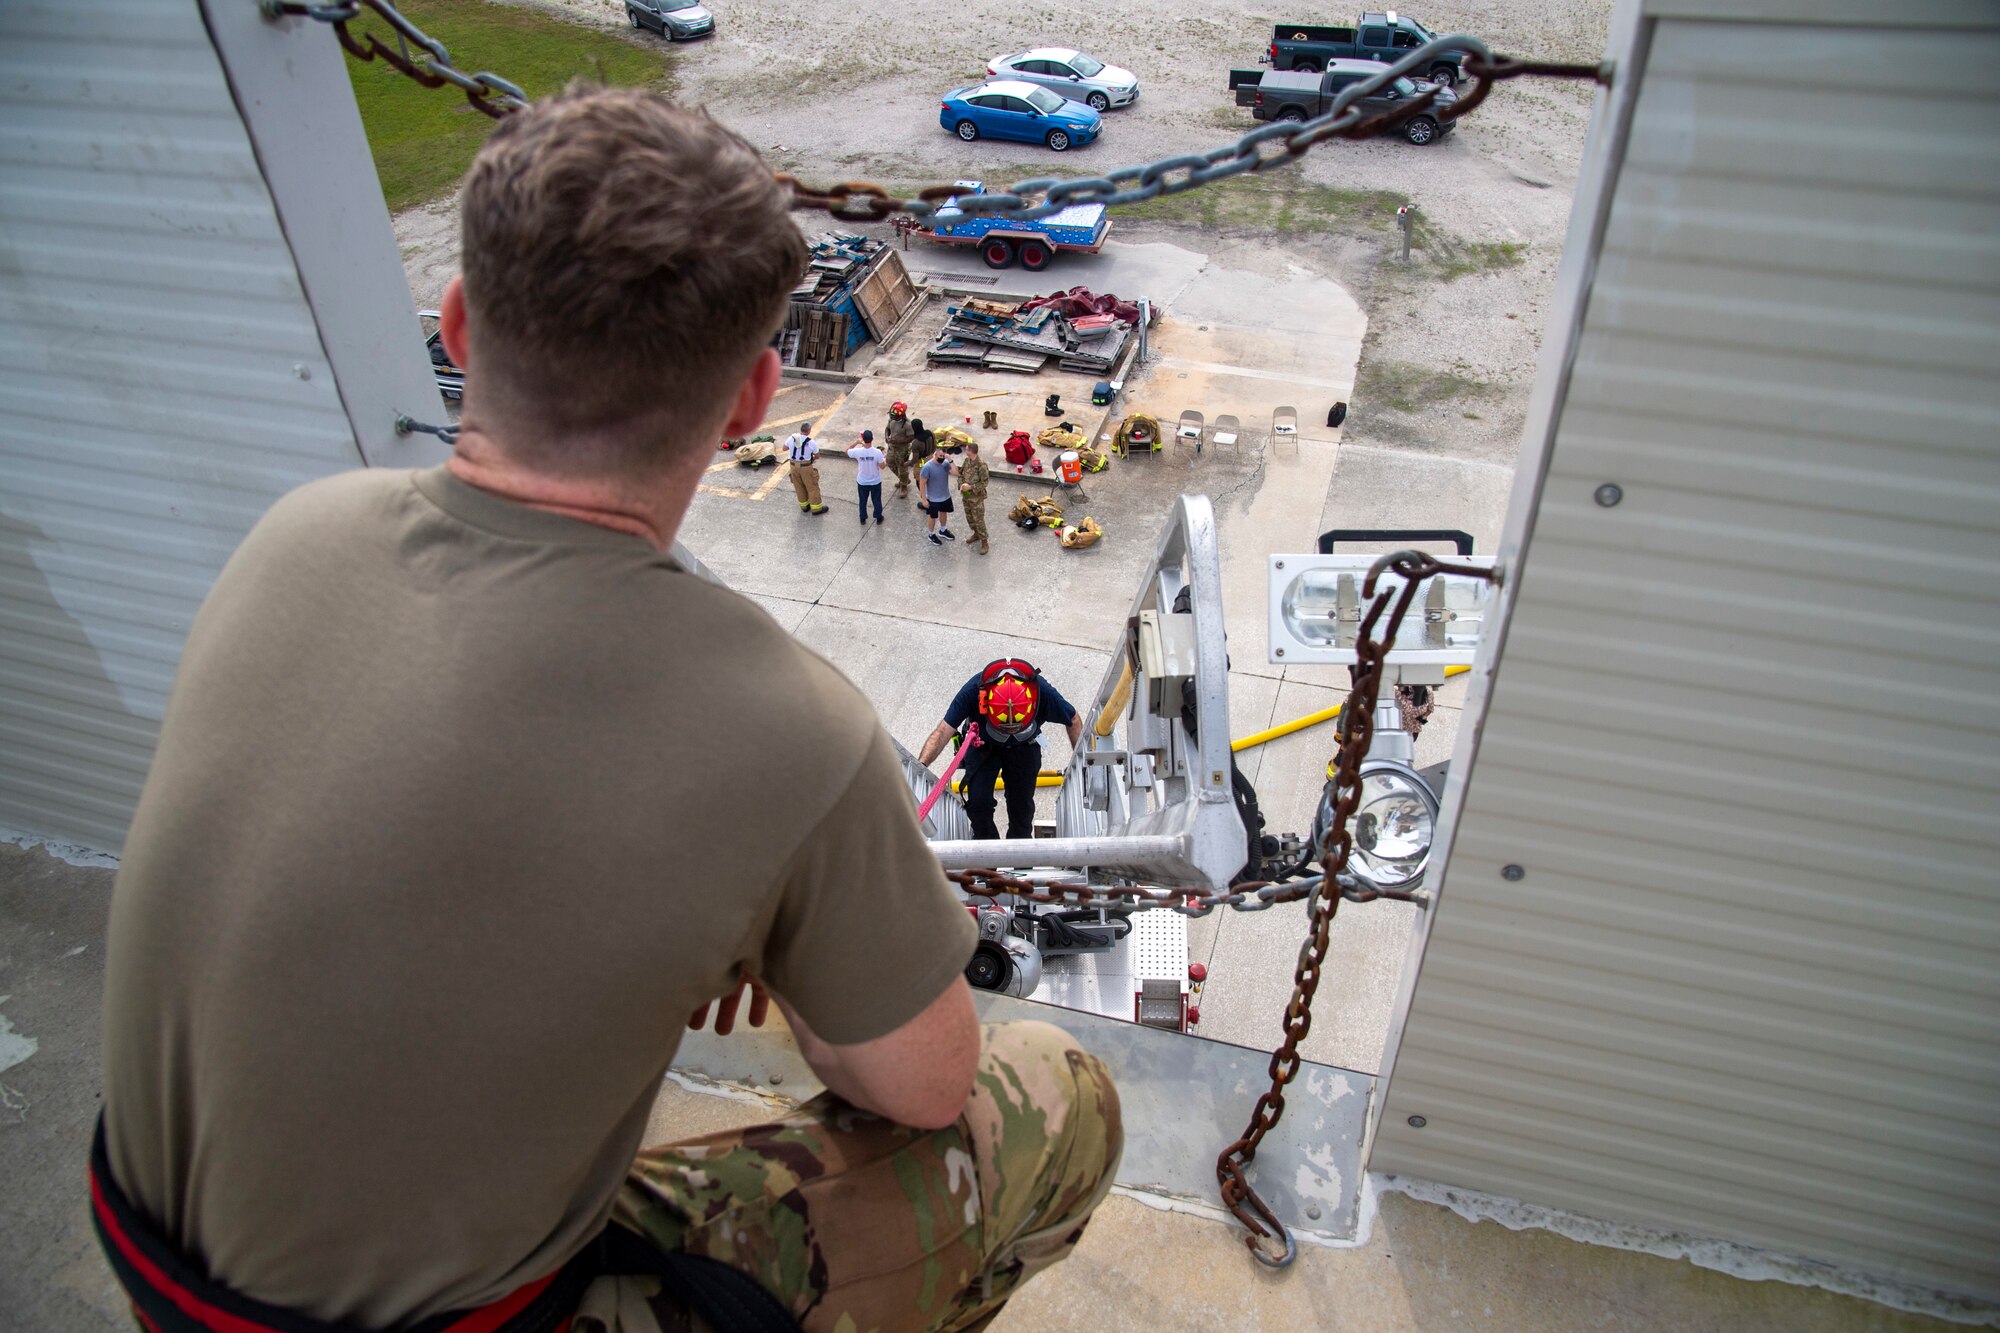 6th Civil Engineer Squadron (CES) Fire and Emergency Services Airmen practice ladder climbing up a structure during a live-burn exercise at MacDill Air Force Base, Fla, March 23, 2021.